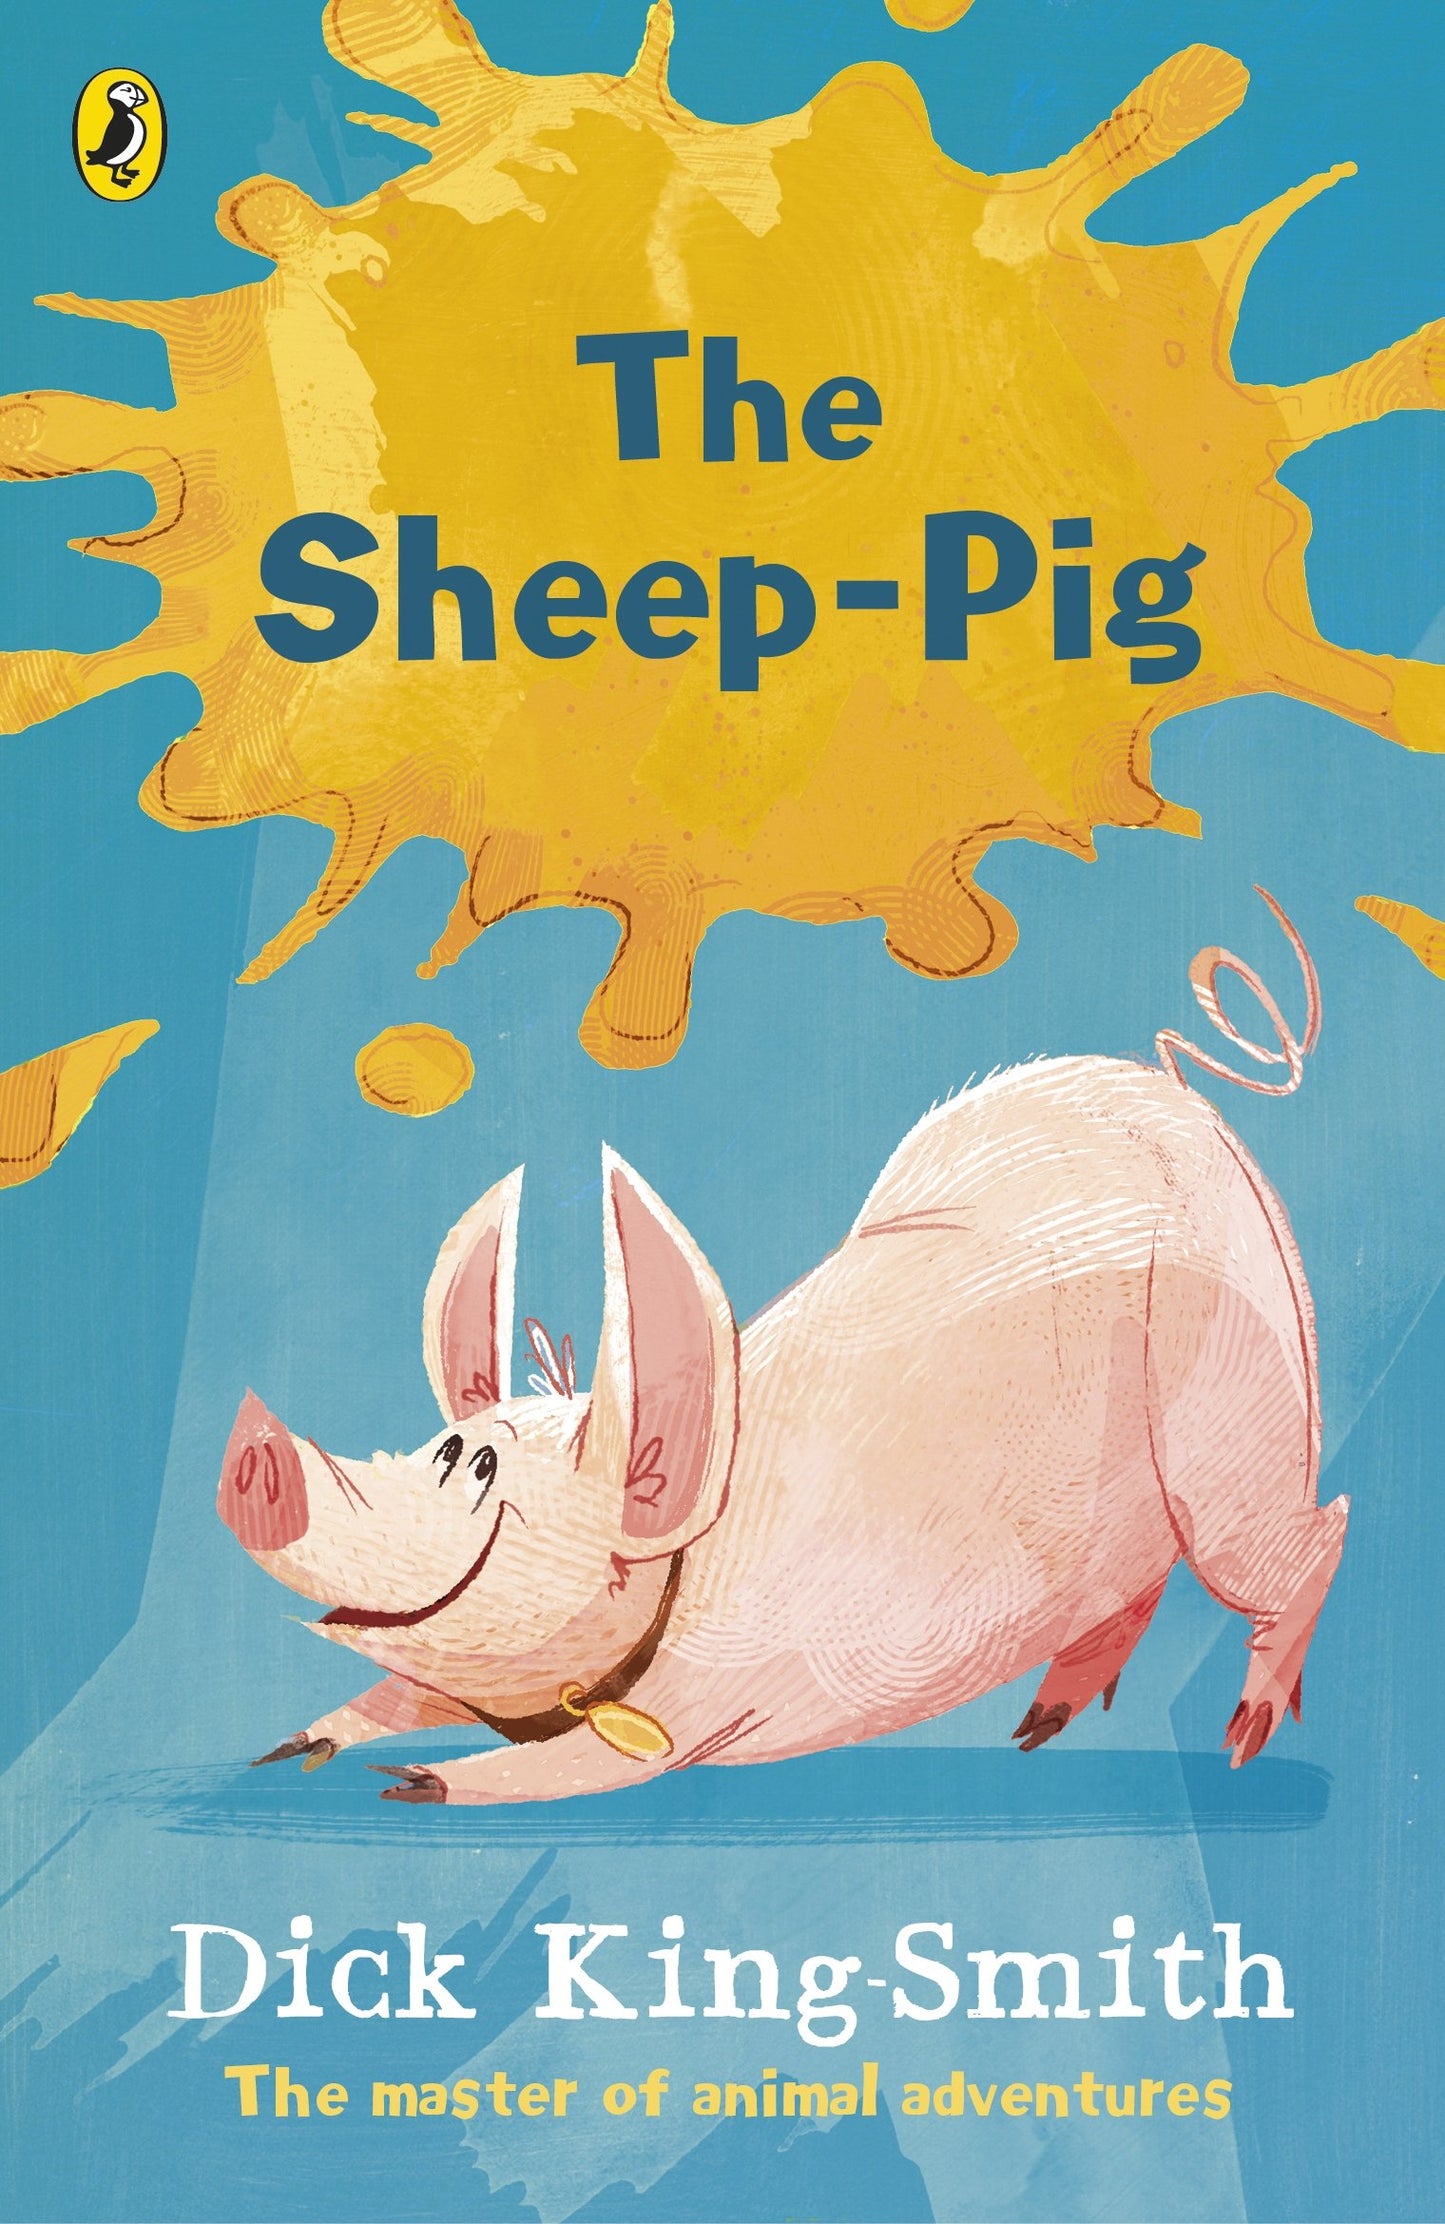 The Sheep-Pig by Dick King Smith